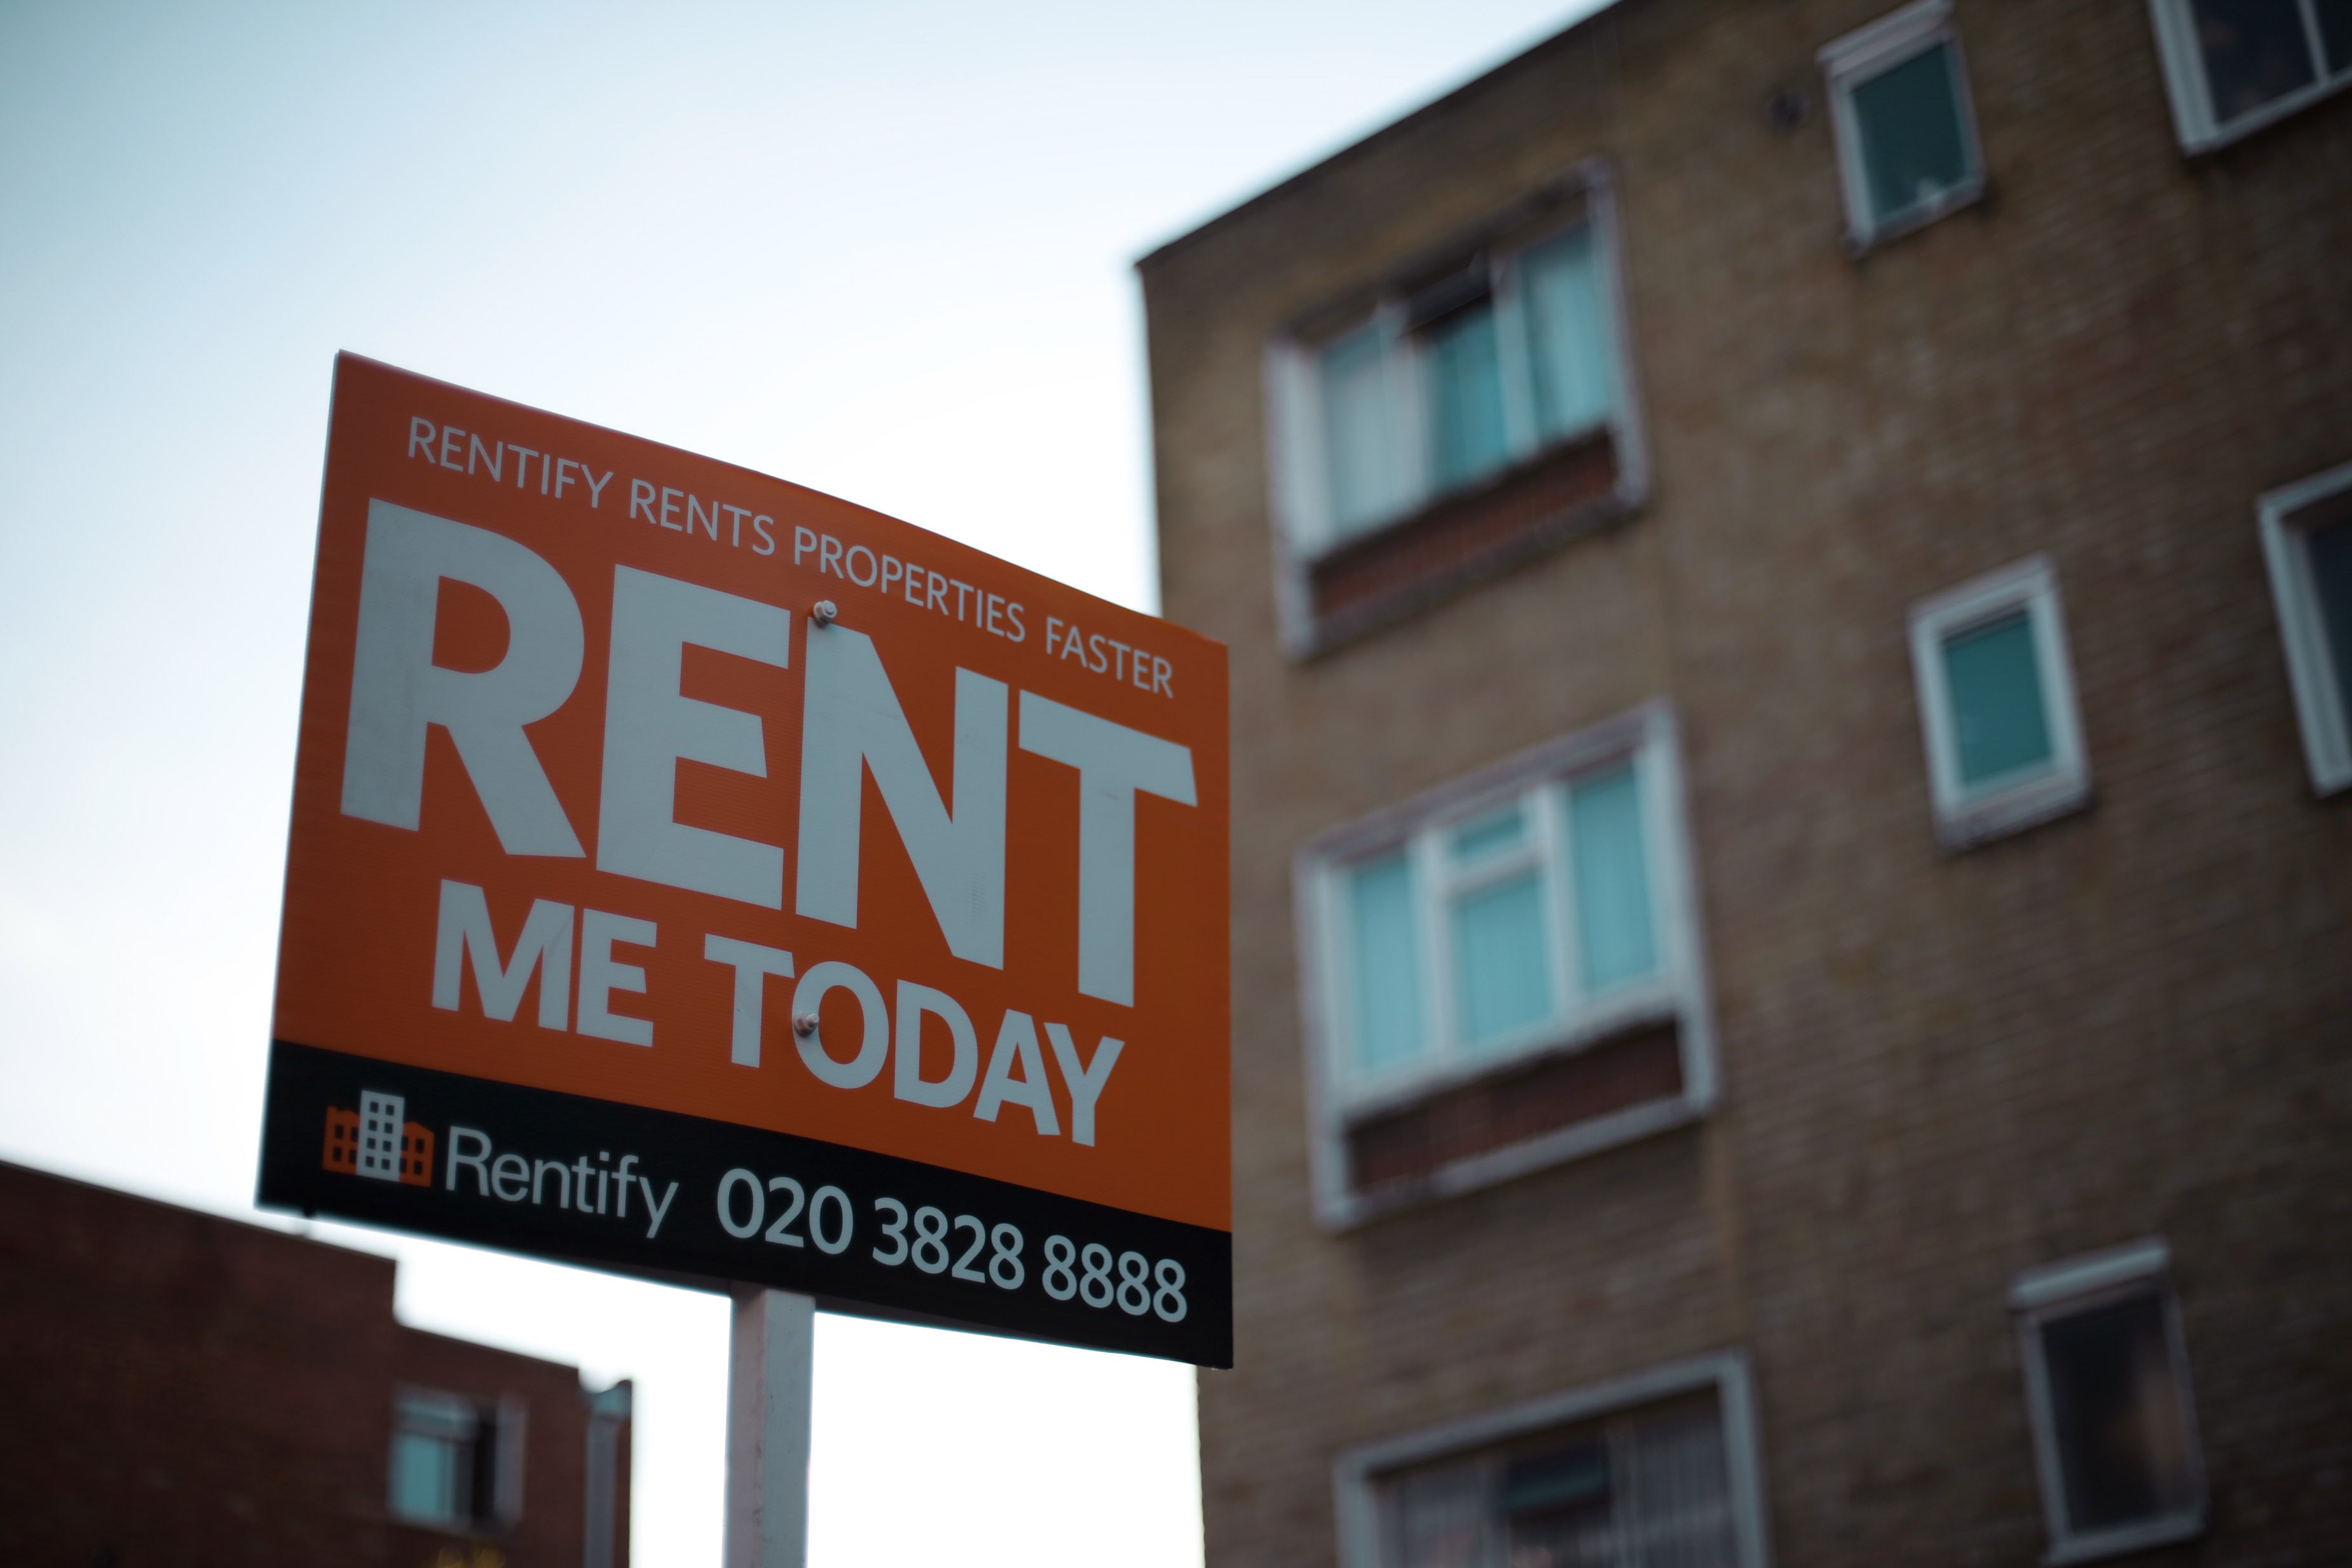 Letting agents across the UK have seen the number of available rentals halve, according to new research (Yui Mok/PA)